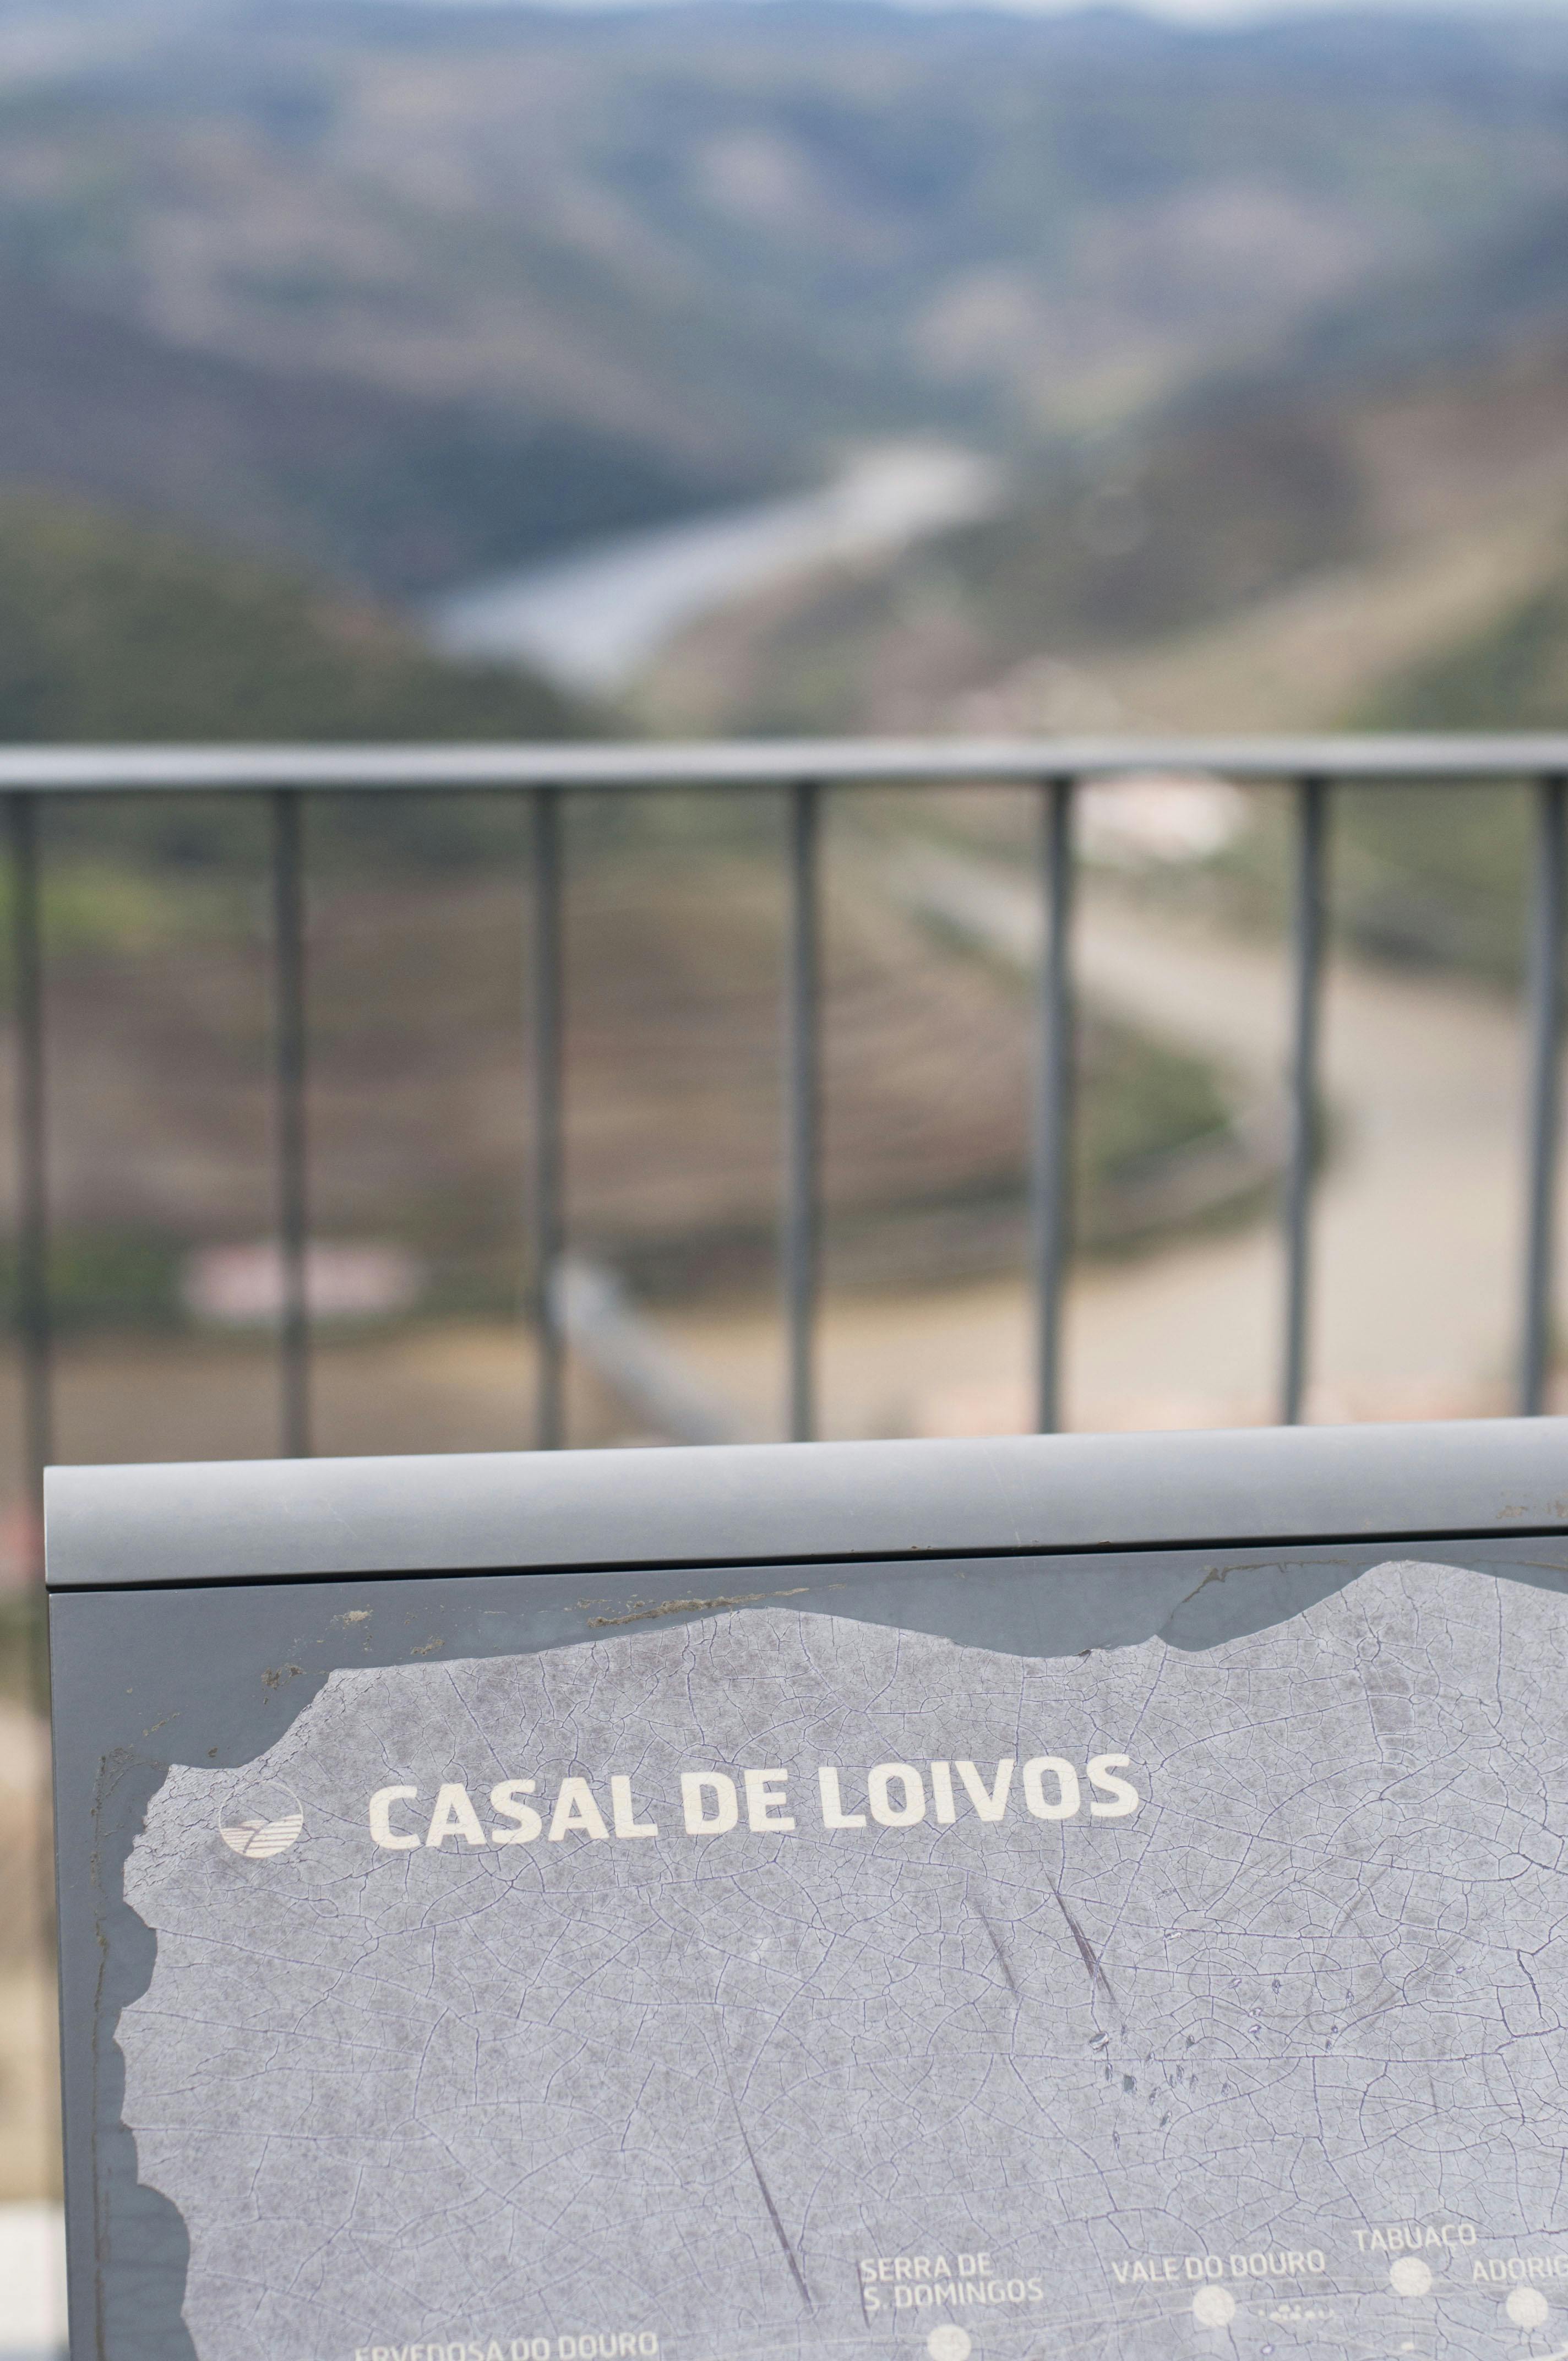 Douro valley tour - Wine tasting, lunch & river cruise-4